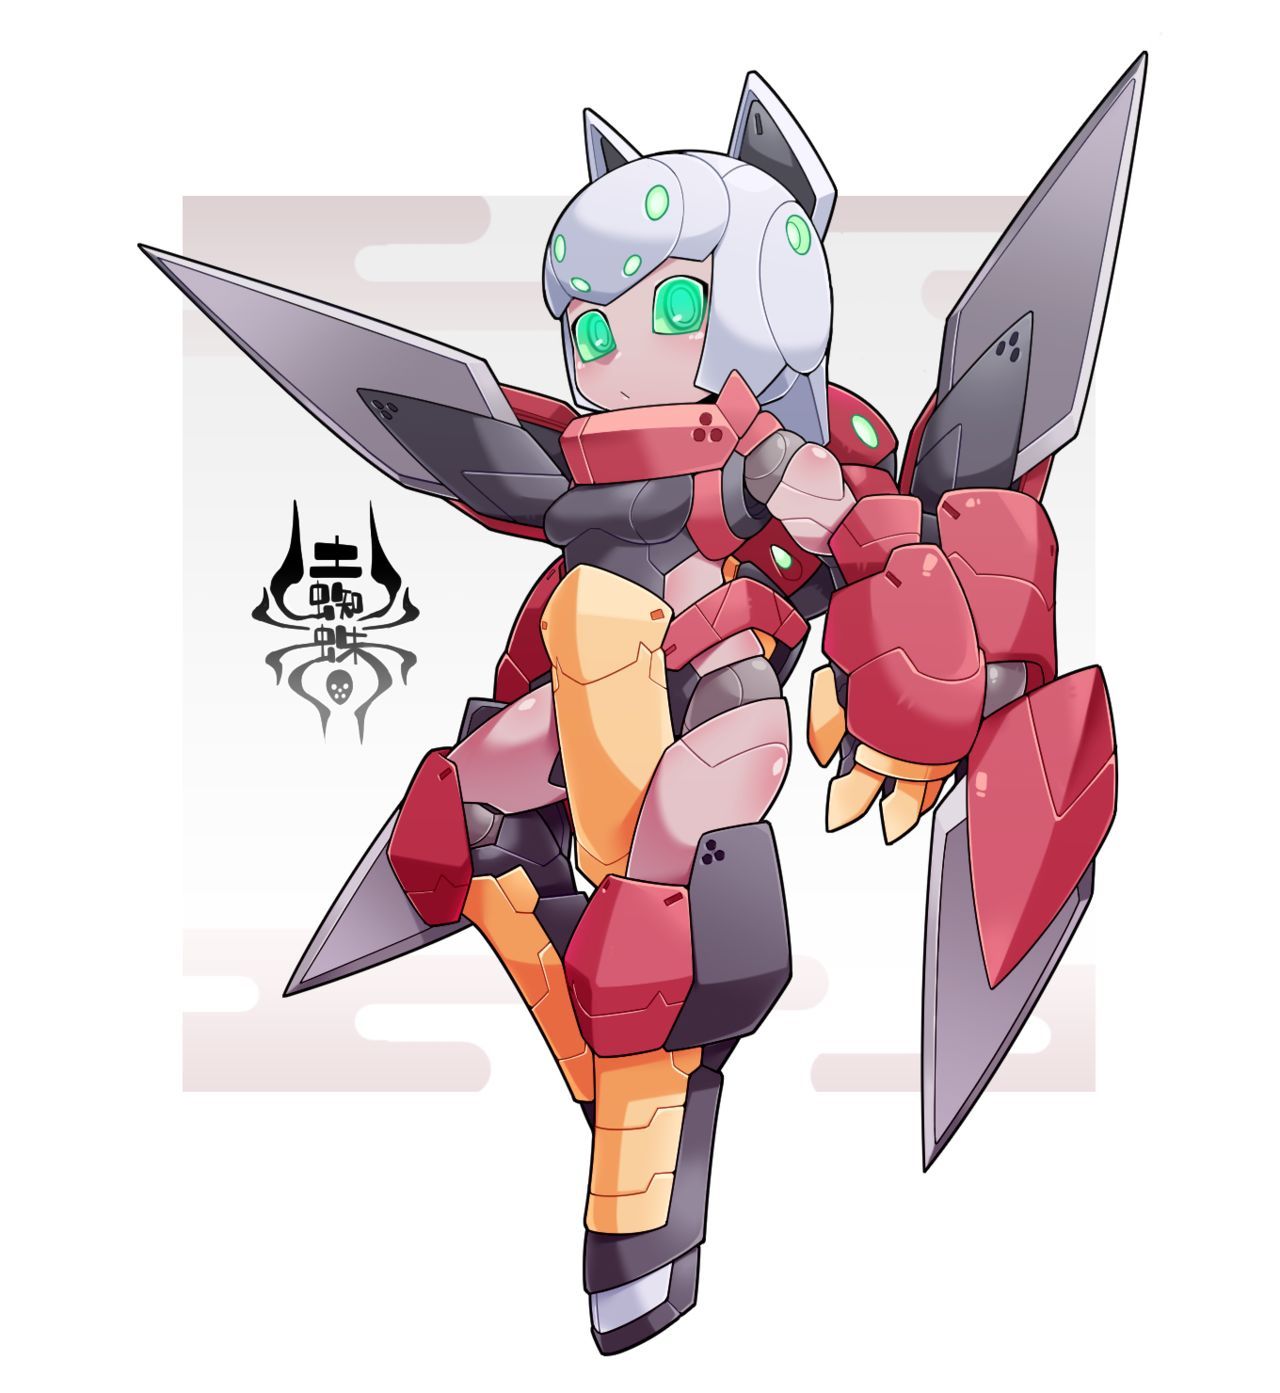 [Pixiv] kni-droid (Kにぃー, weis2626) (Pixiv ID: 1937581) 3